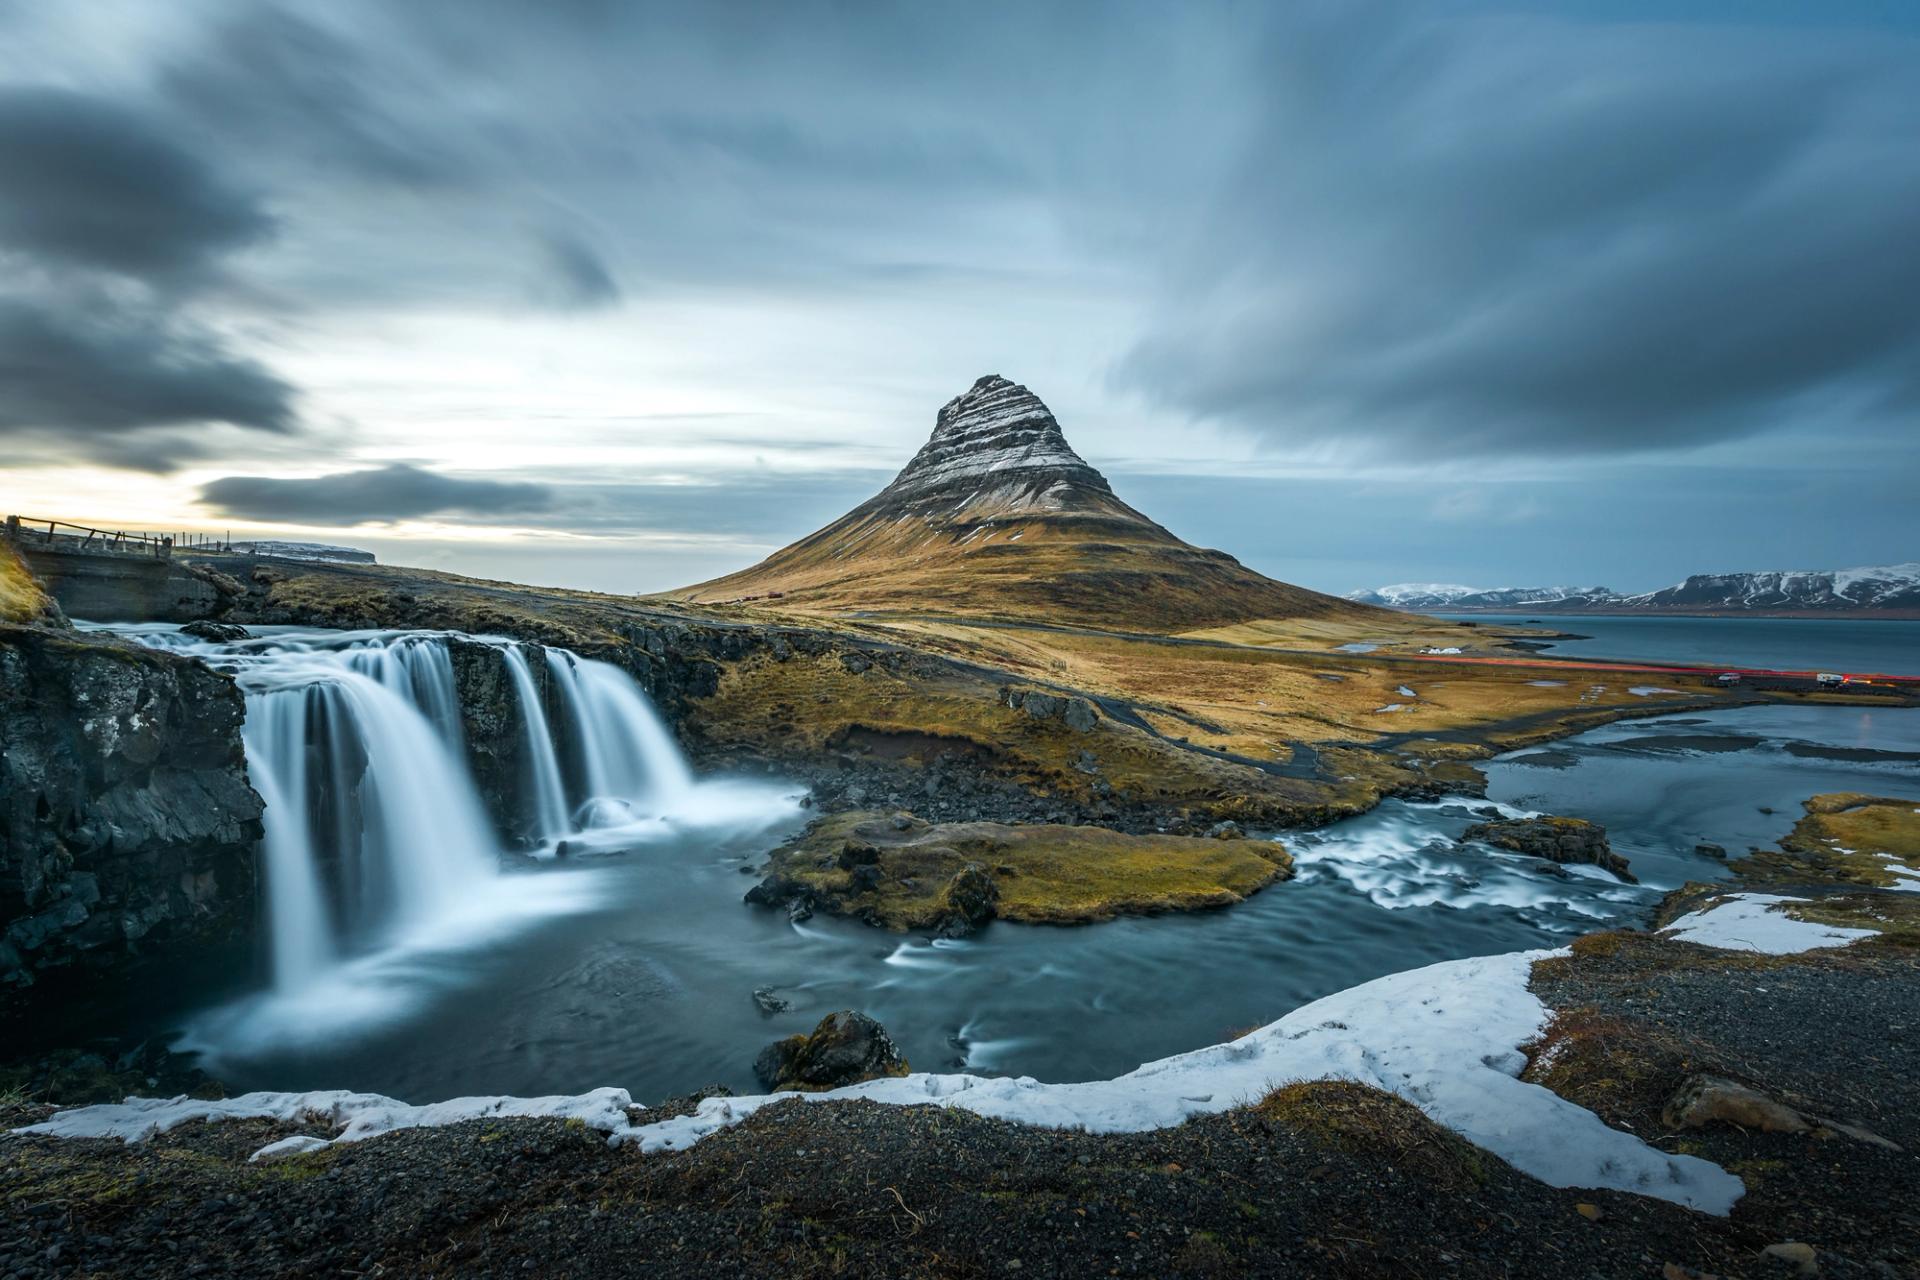 Kirkjufell mountain with its unique shape and Kirkjufellsfoss waterfall in the foreground